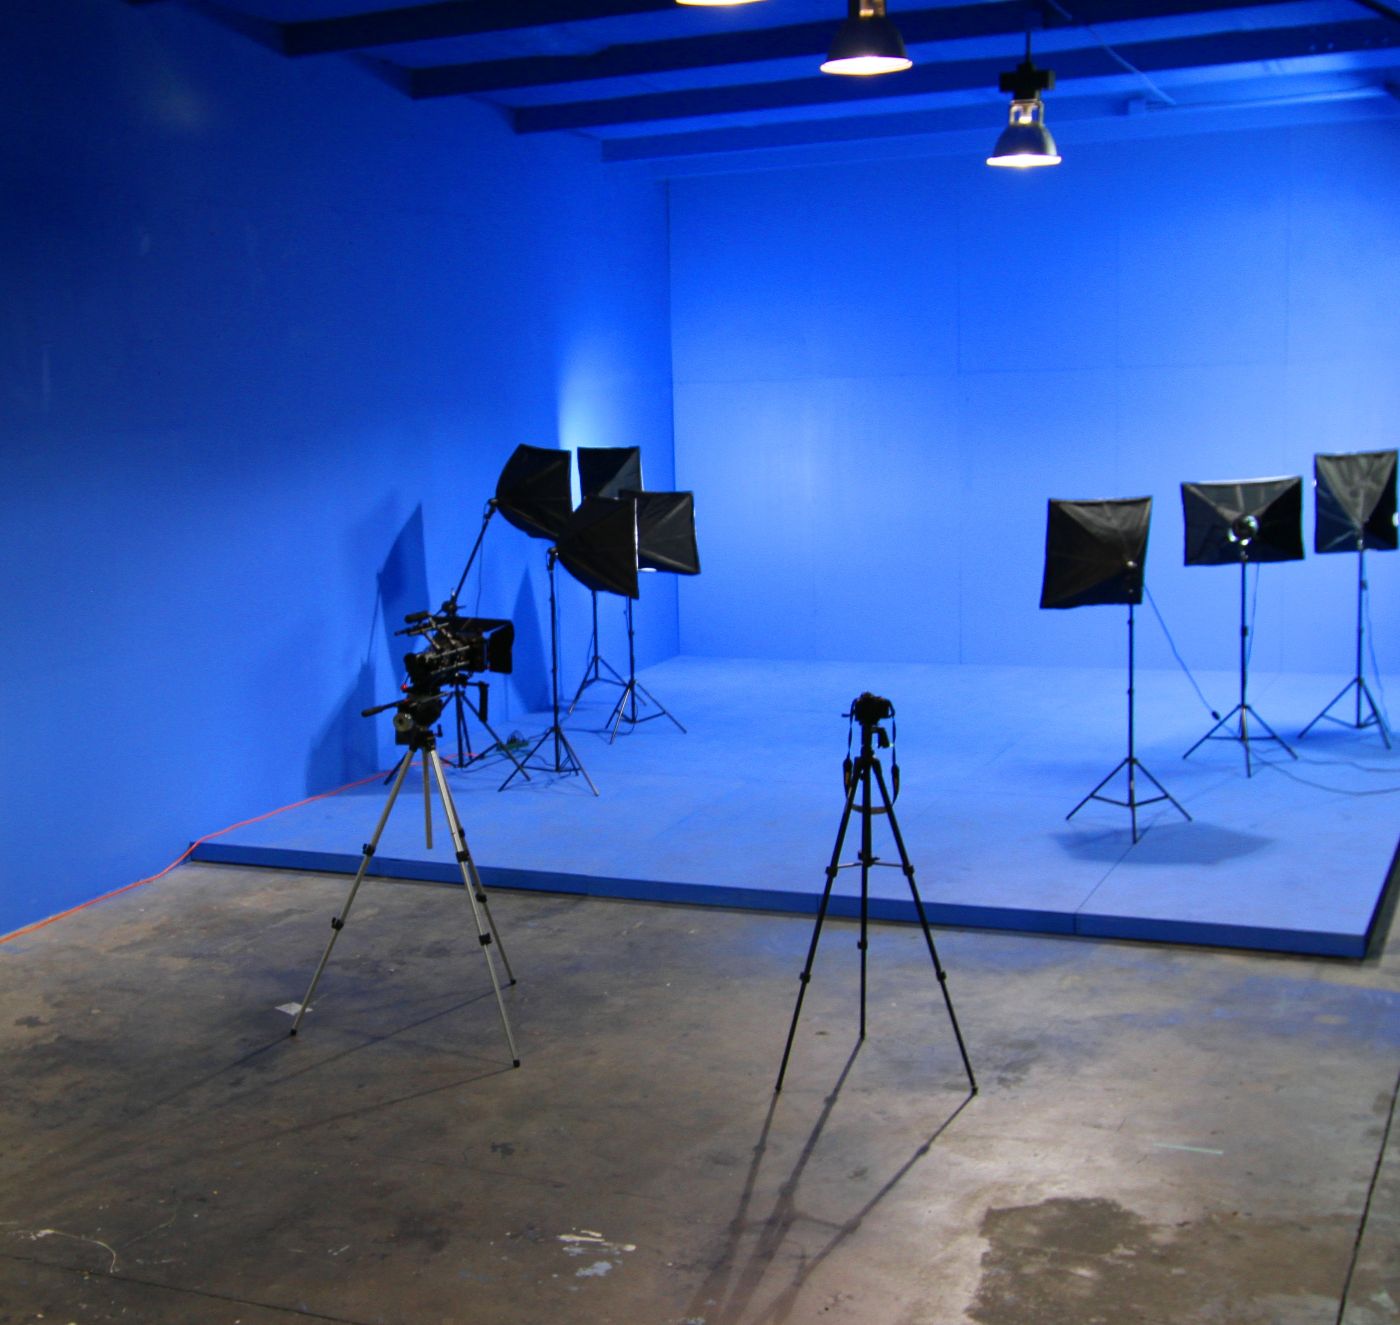 Our 1,700 sq. ft. blue screen is perfect for special effects